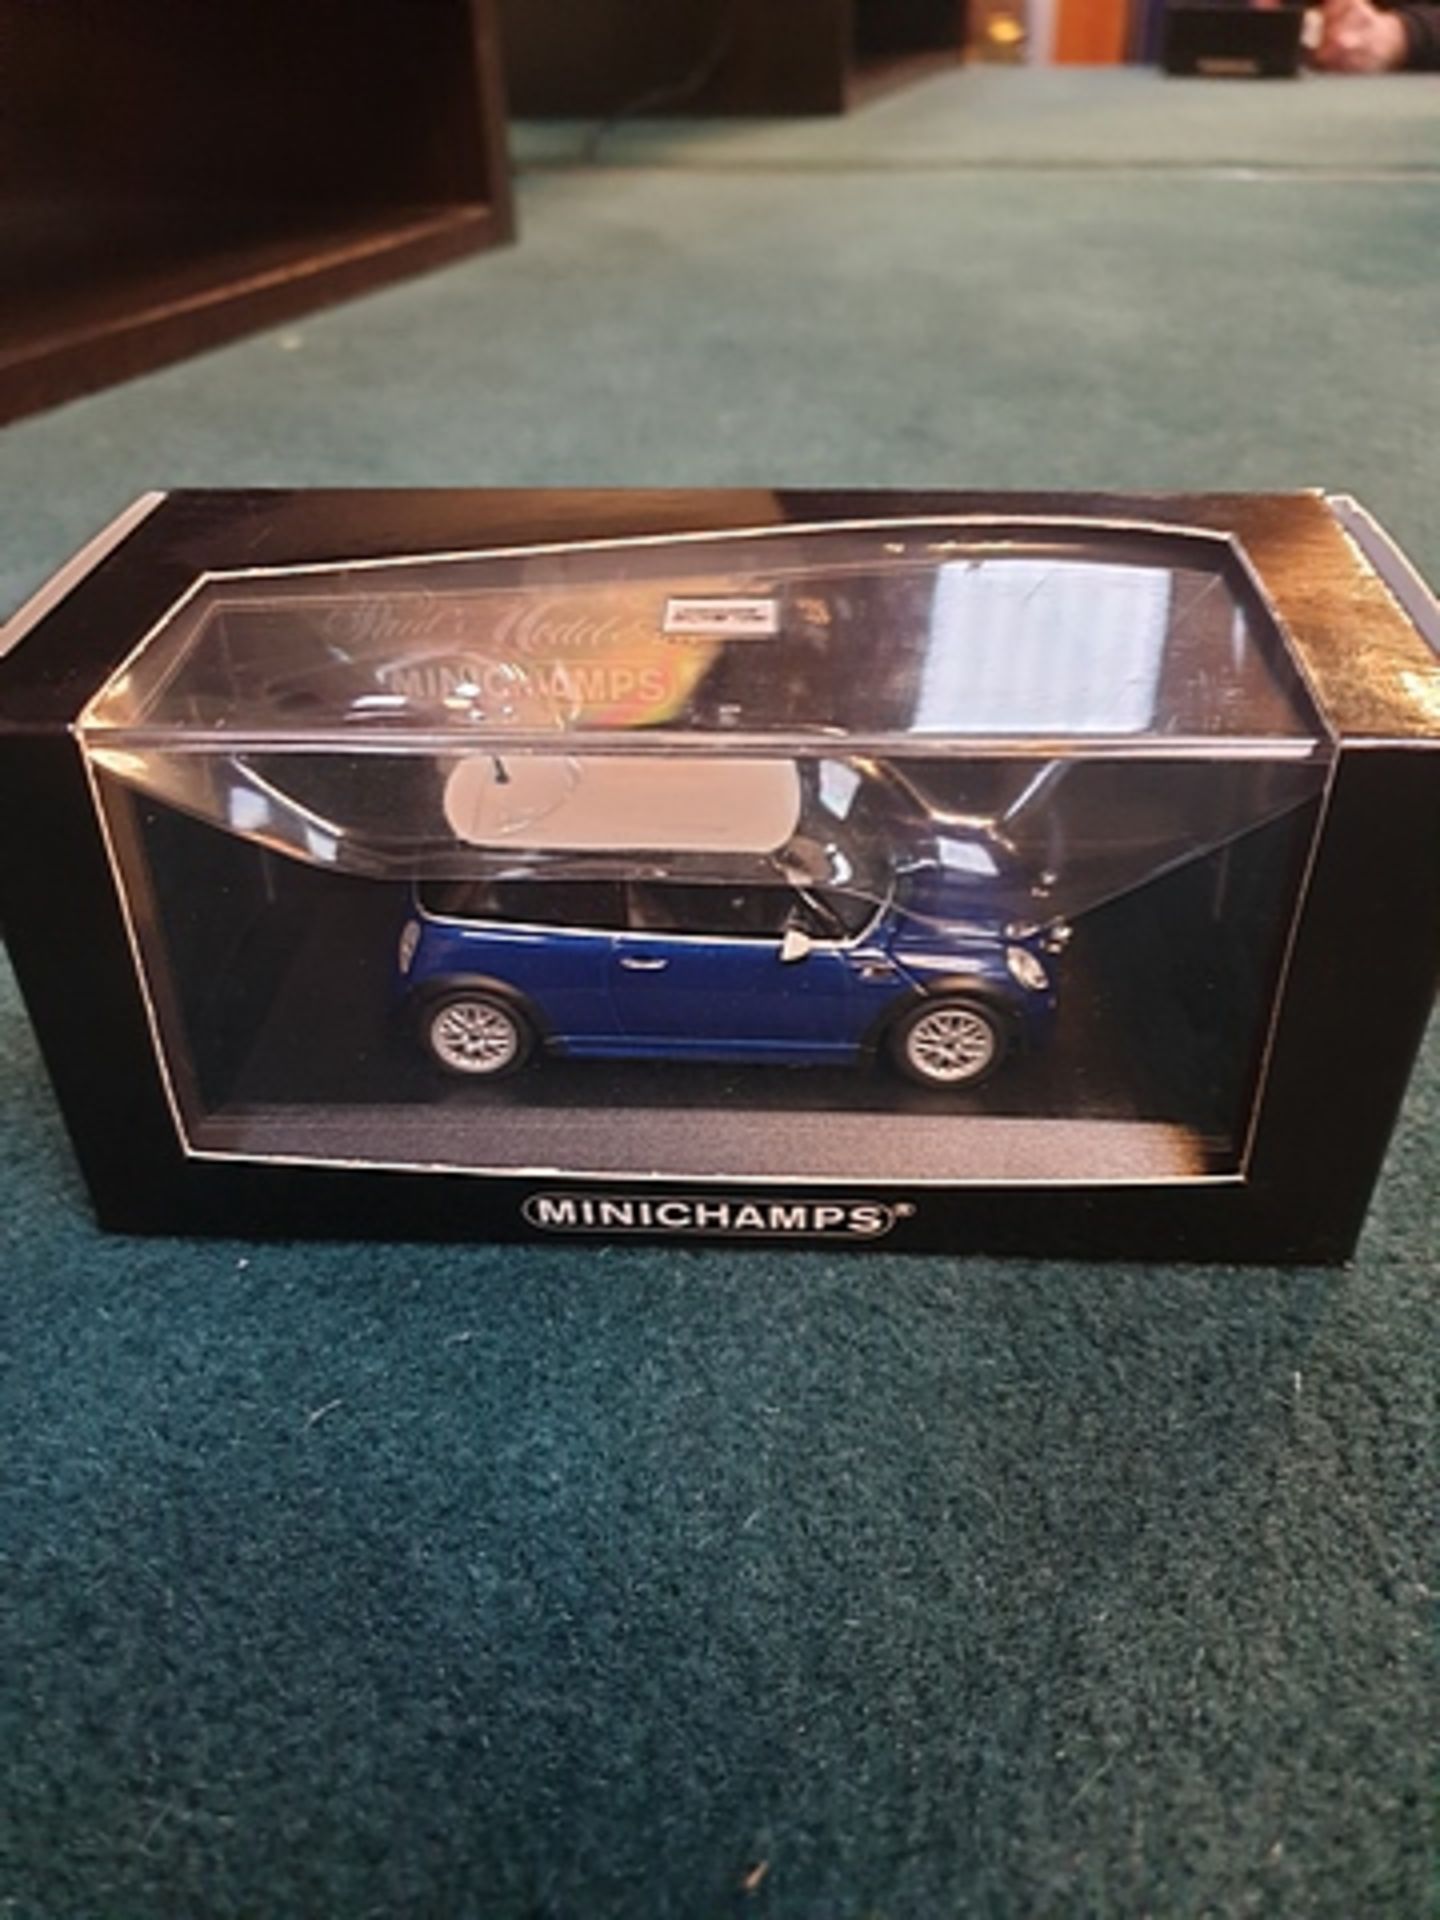 Minichamps 1/43 - 431 138270 Mini One W/ Aero Package 2003 Blue Metallic Limited To 1632 Pieces - Image 4 of 4